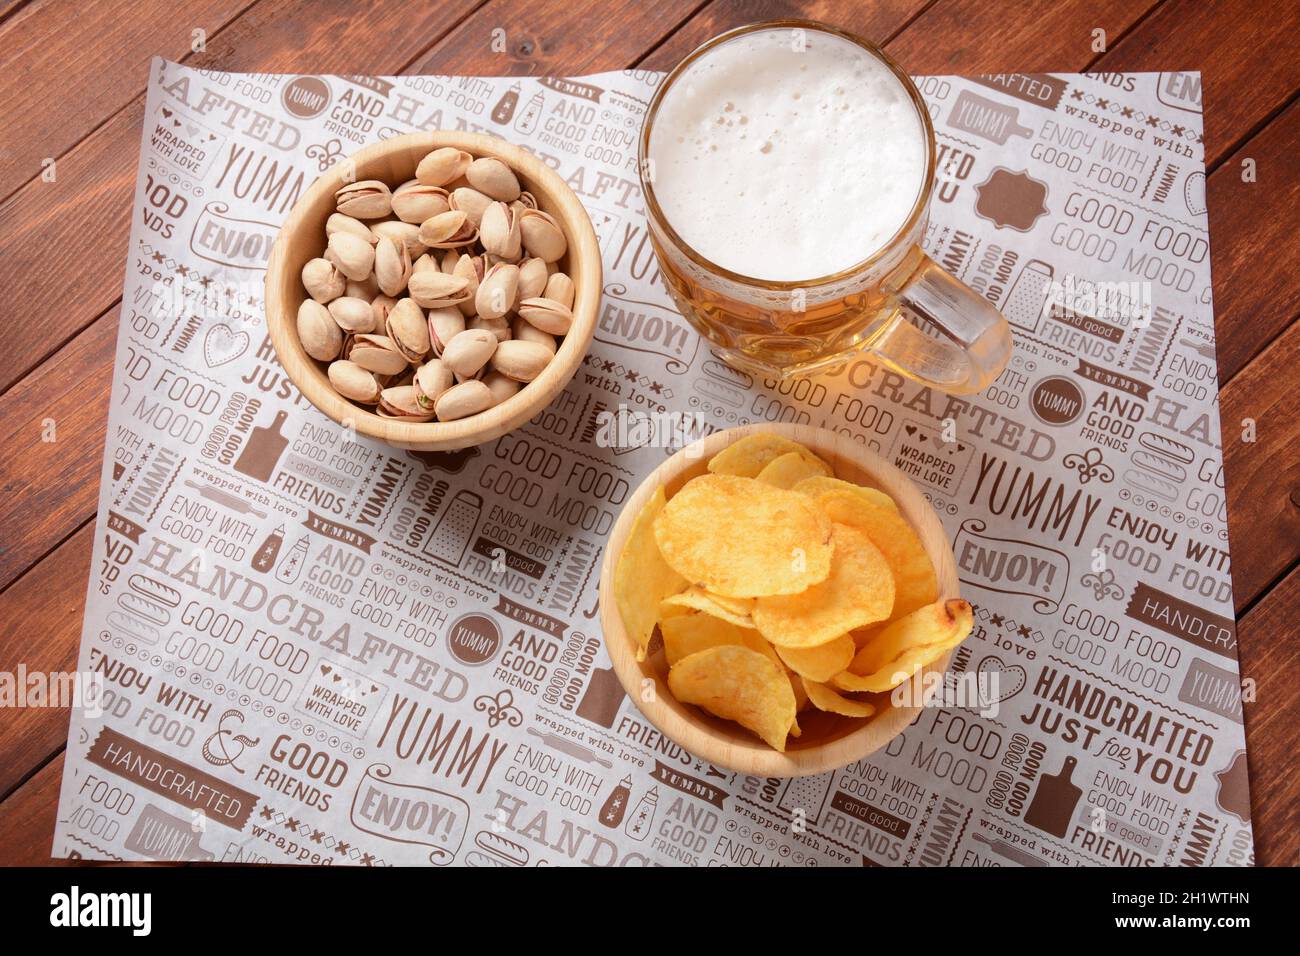 A mug of cold beer with pistachio nuts, and potato chips in wooden bowls. Stock Photo